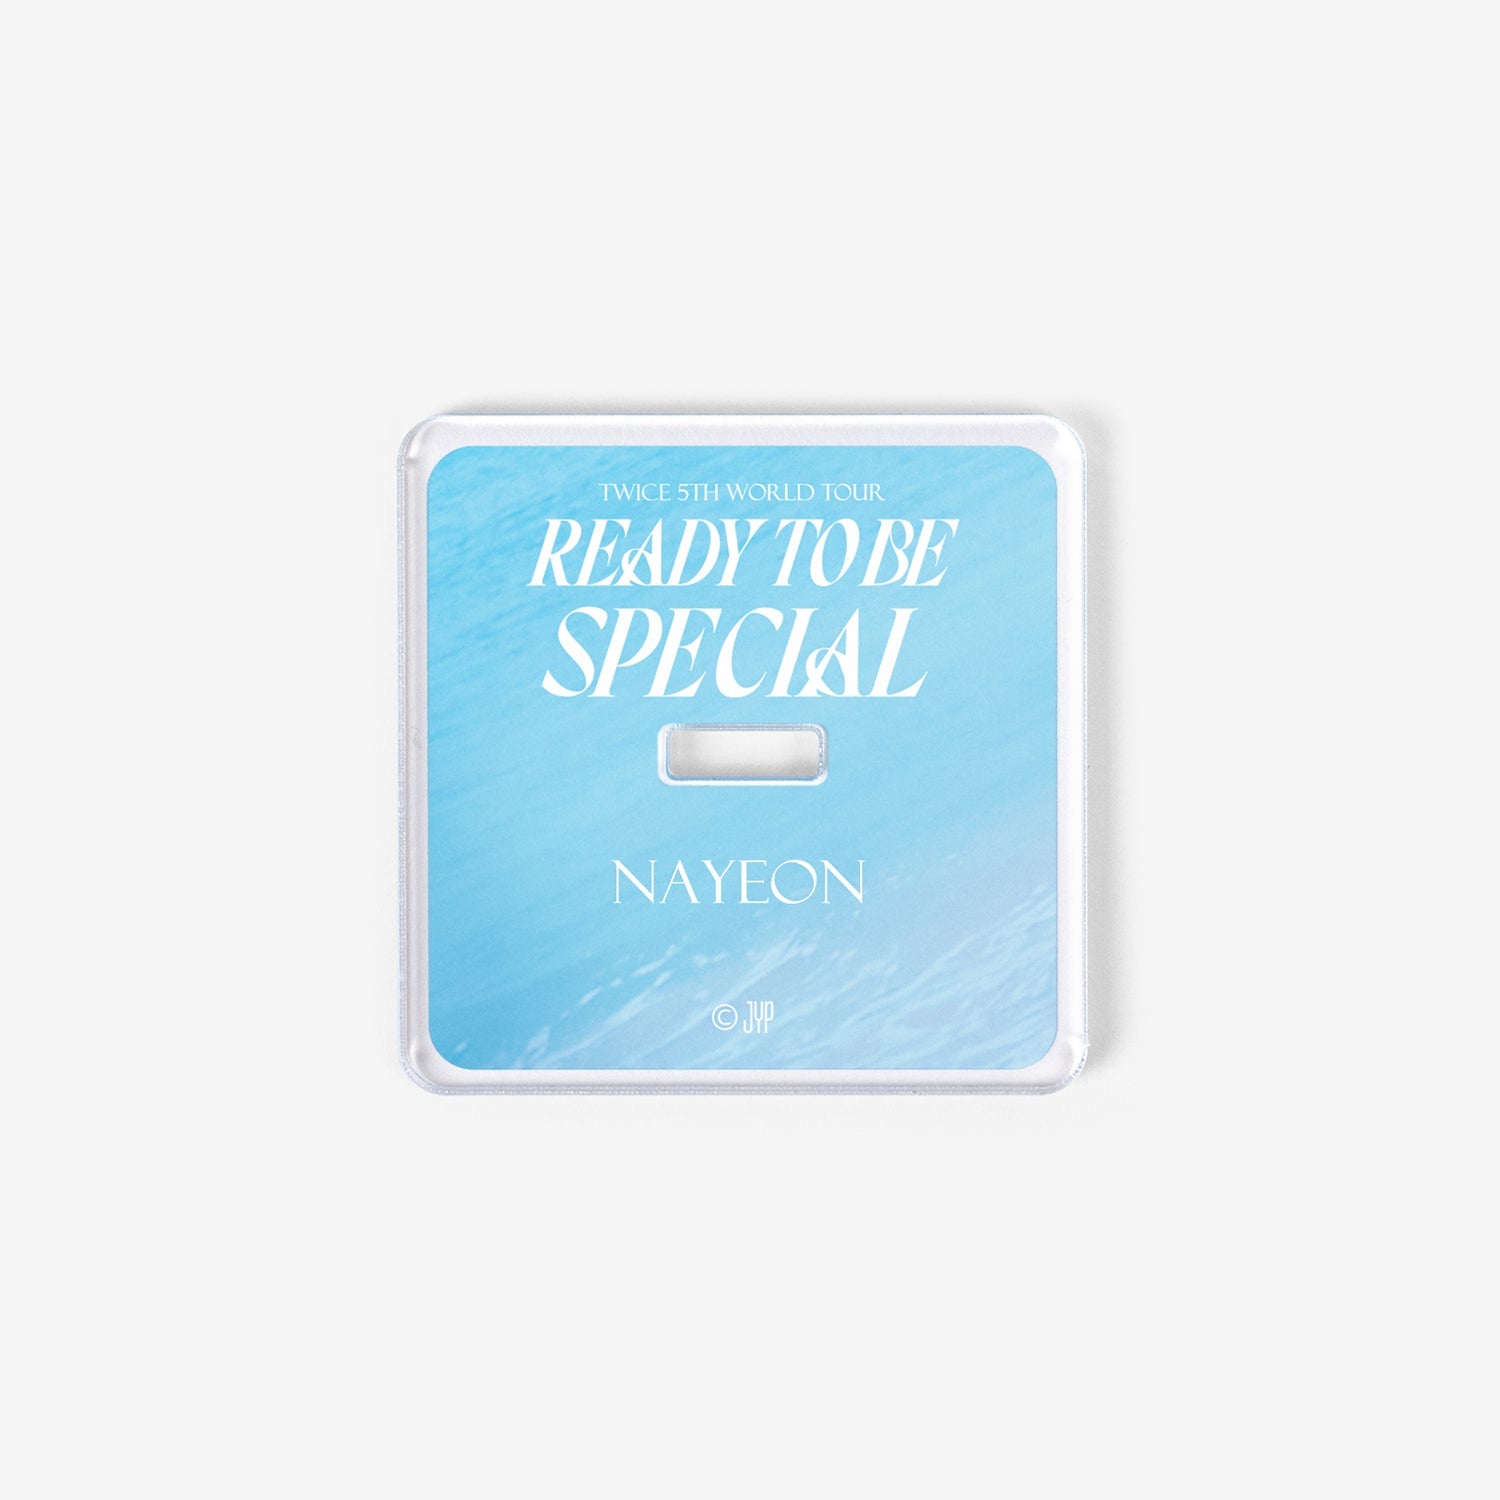 ACRYLIC STAND - NAYEON【SPECIAL】/ TWICE『READY TO BE SPECIAL』